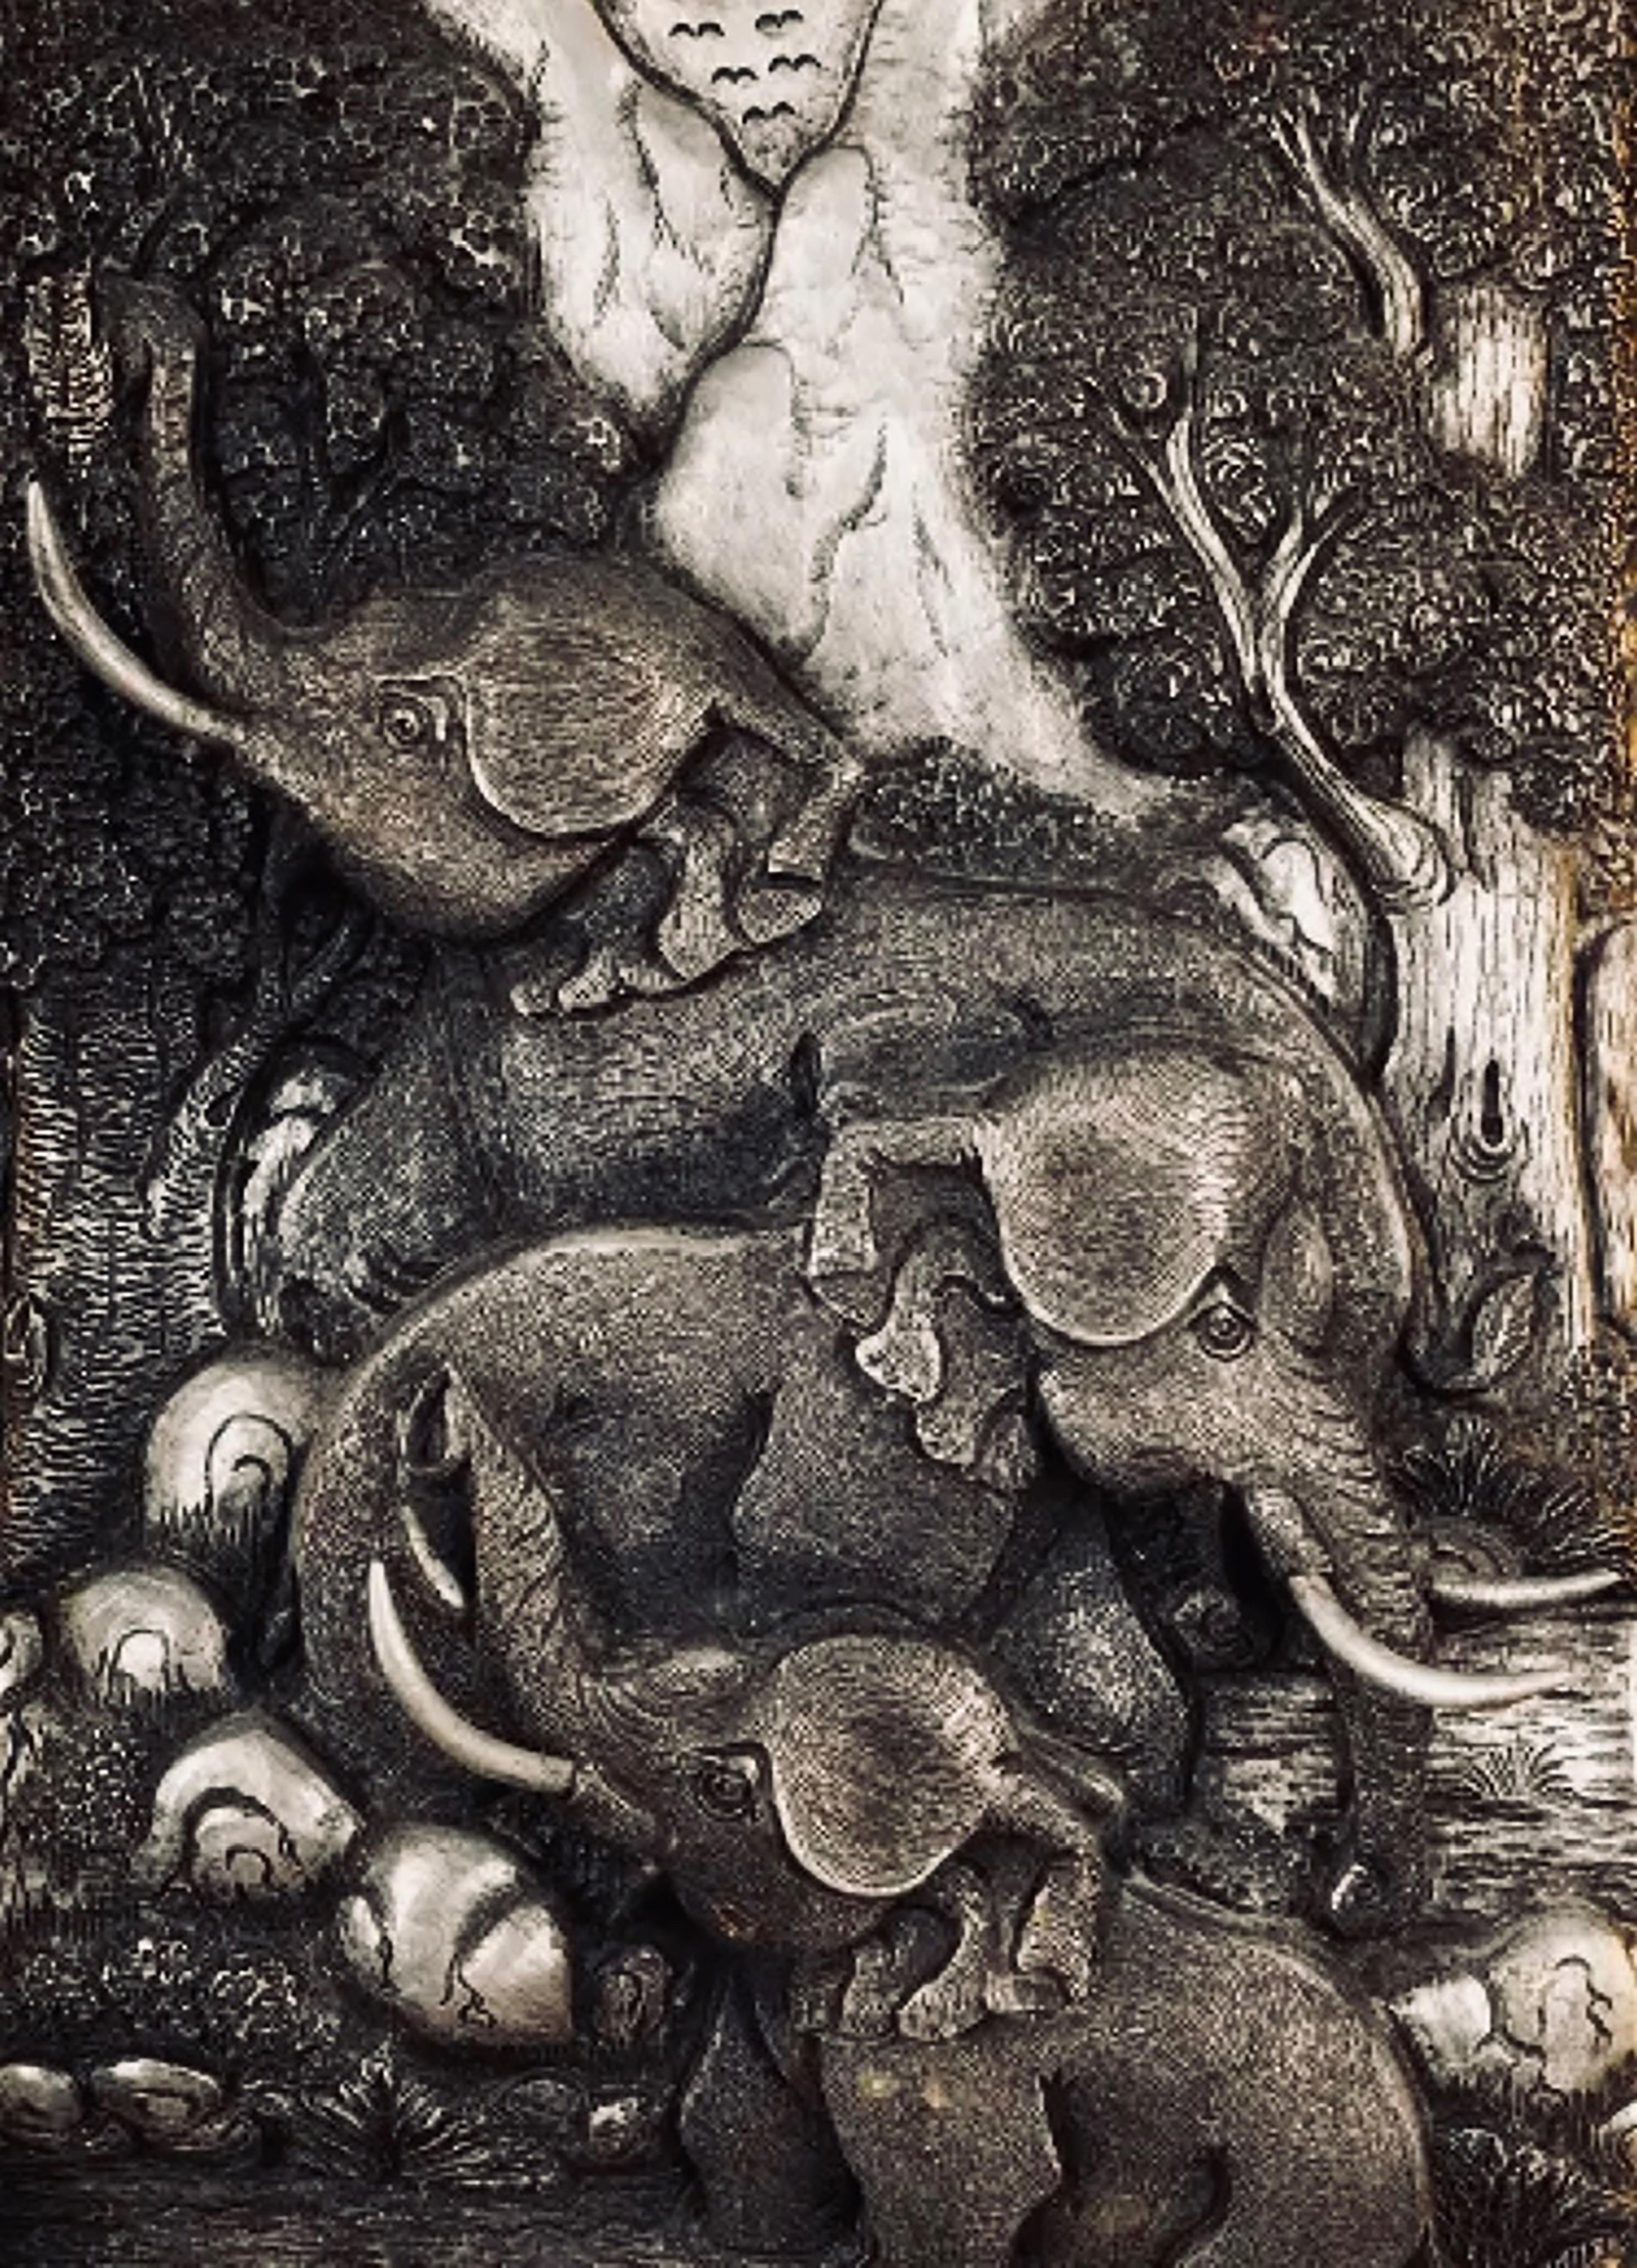 776 Framed Chinese sculpture of silver-pewter fruits.
Featuring scenes of elephants masterly done.
Dimensions: 13” wide x 16” high x 2” deep.
 